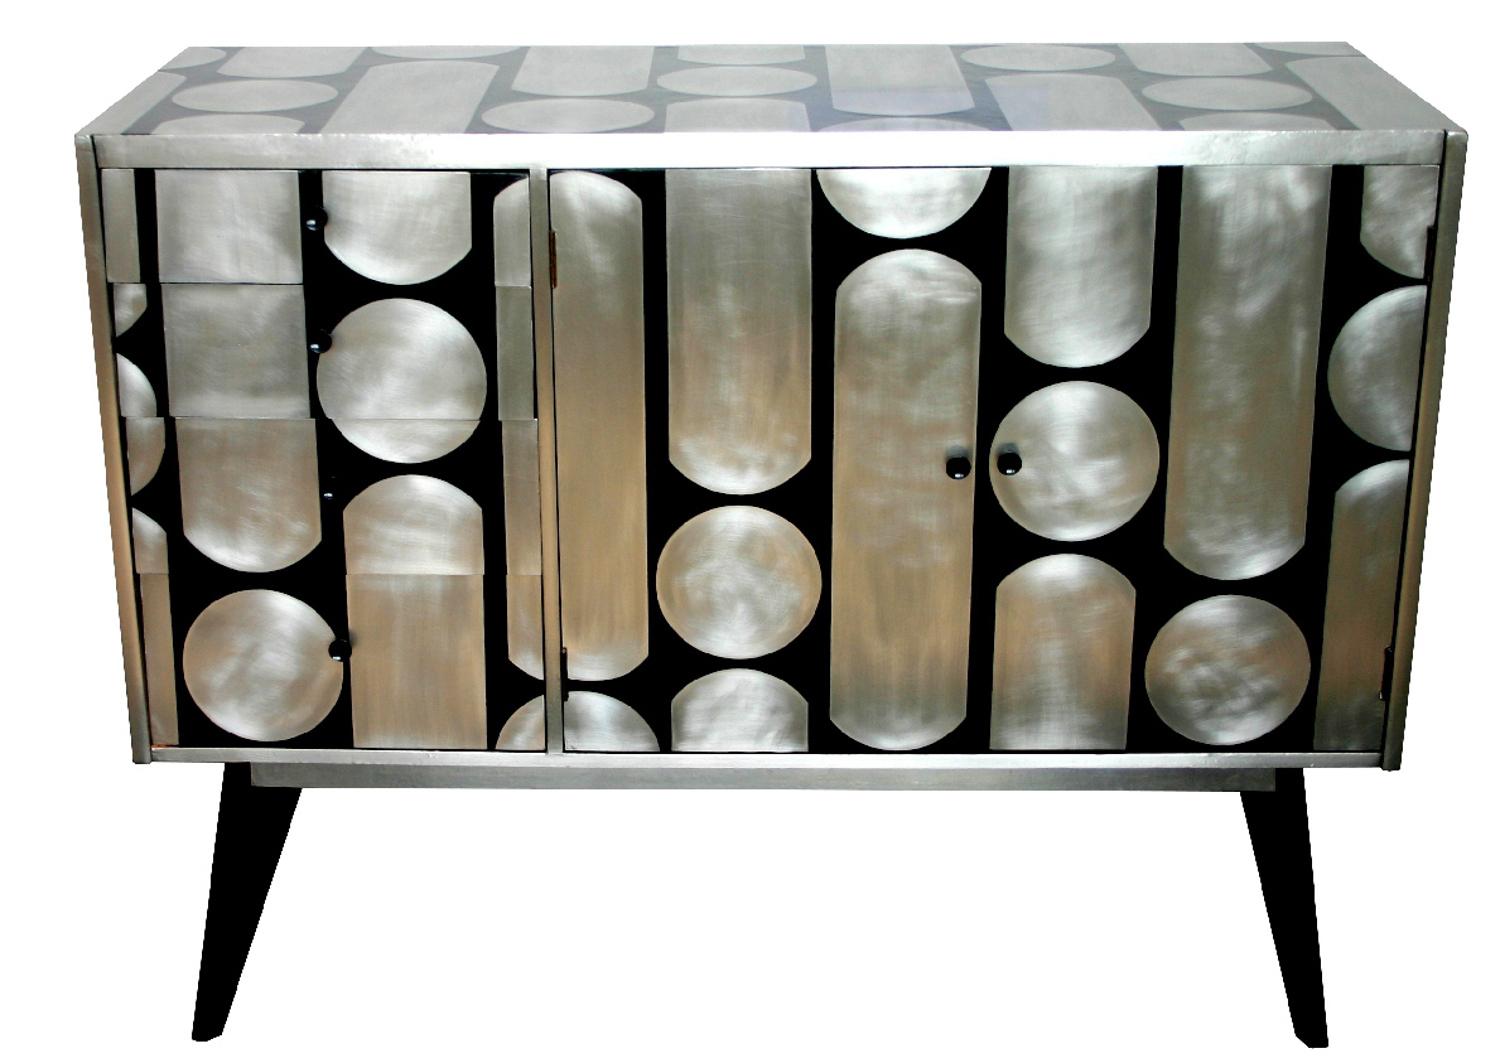 A mid-century sideboard that has been reconditioned and reimagined by designer and maker Kate Noakes. Kate uses a unique process that she has developed of cutting her original designs in sheet metal that are applied onto existing furniture and then